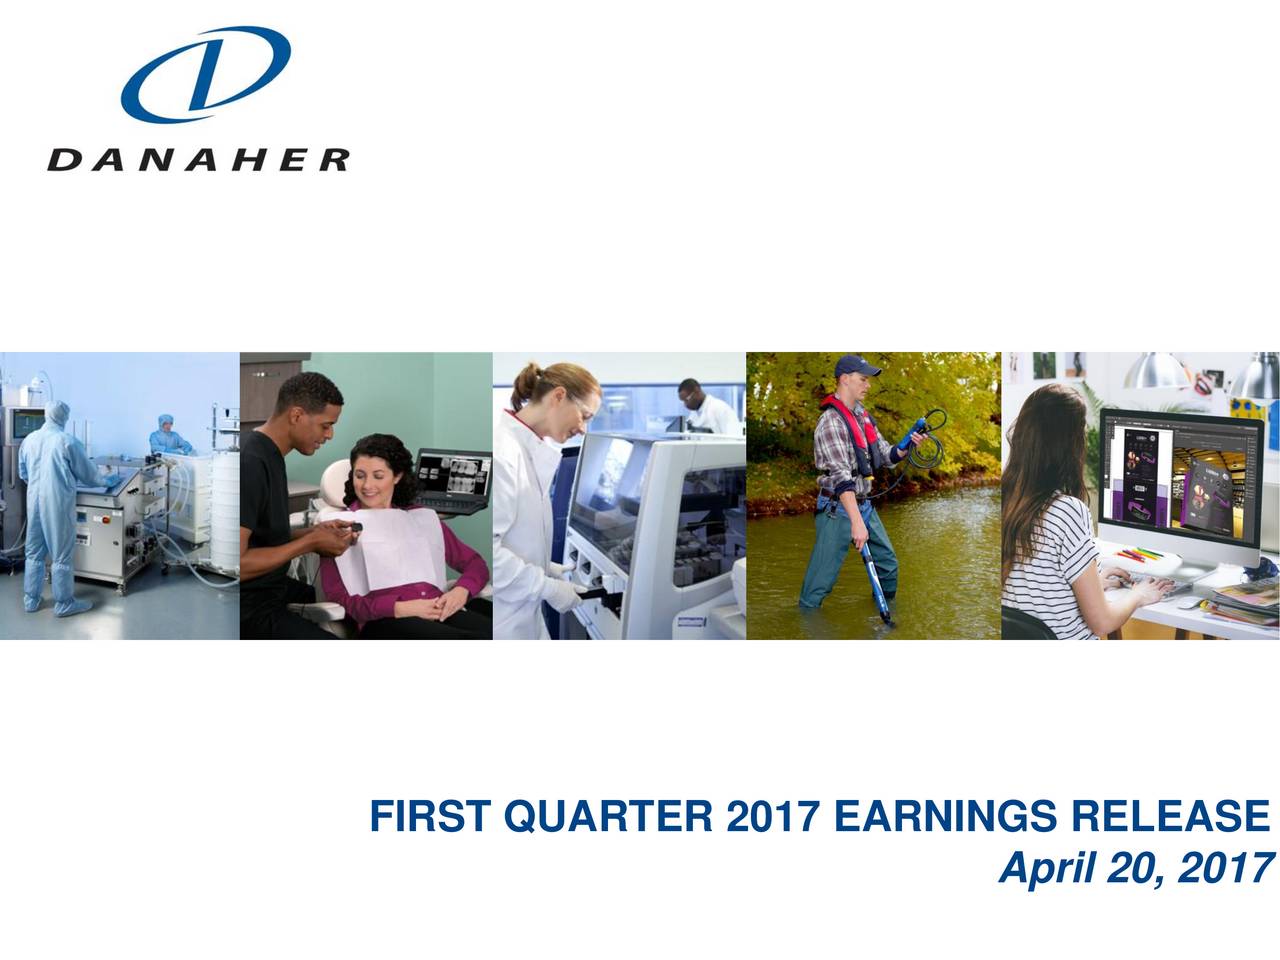 Danaher Corporation 2017 Q1 Results Earnings Call Slides (NYSEDHR